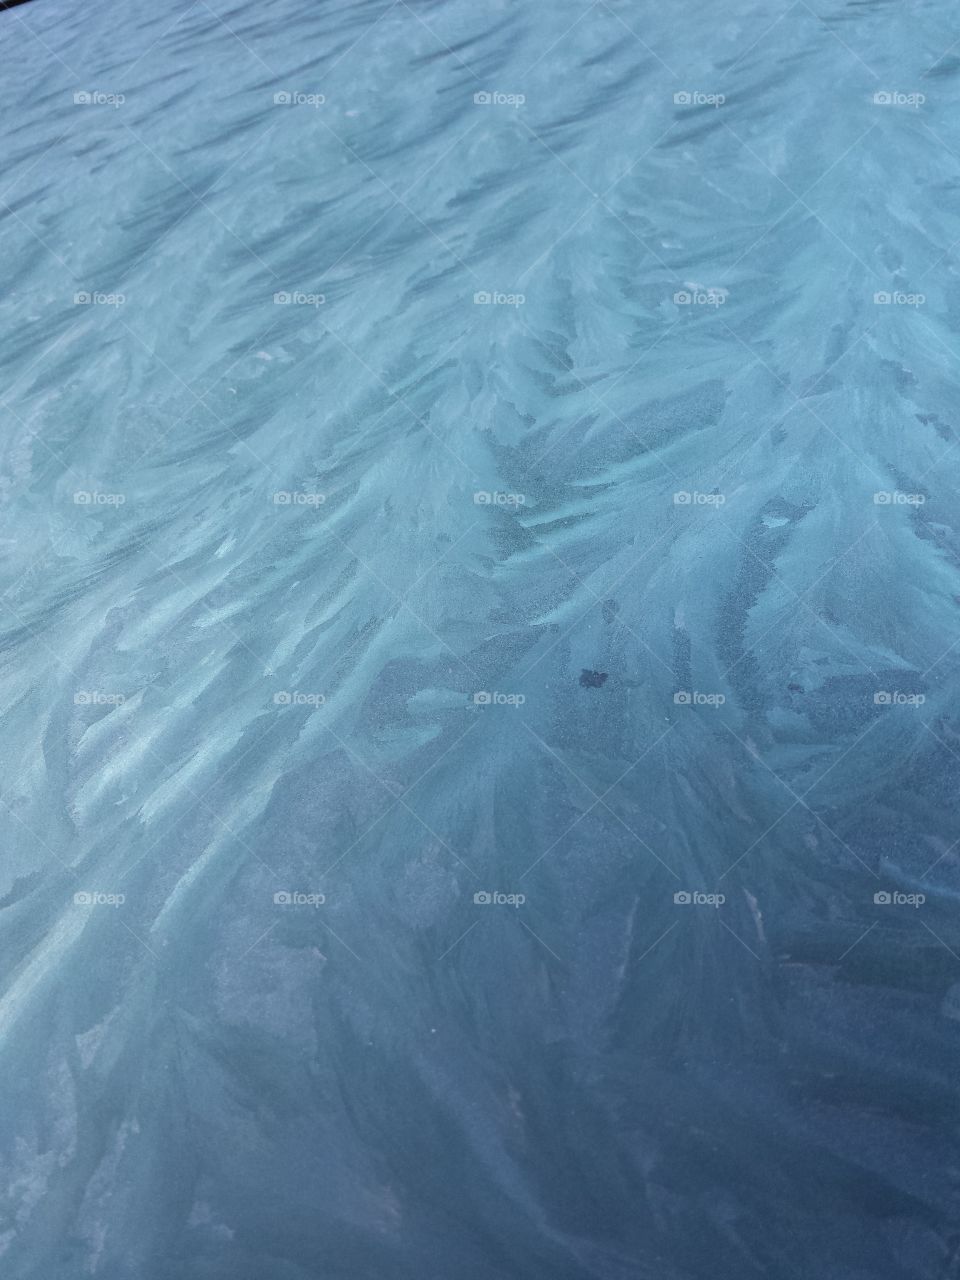 Patterned Ice